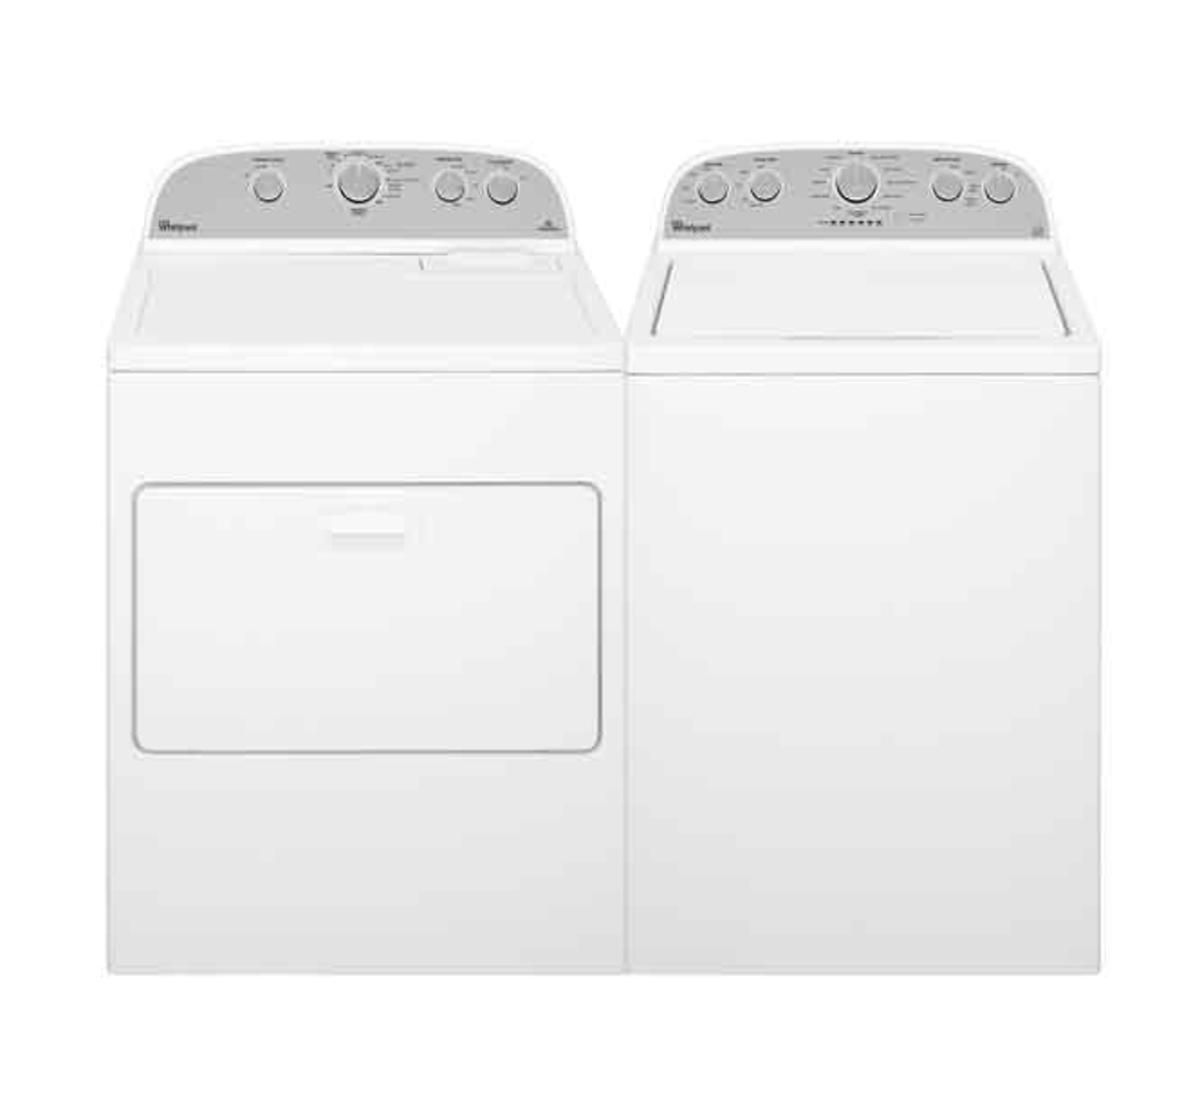 Whirlpool Cabrio Top Load Washer & Dryer Pair | Badcock Home Furniture &More